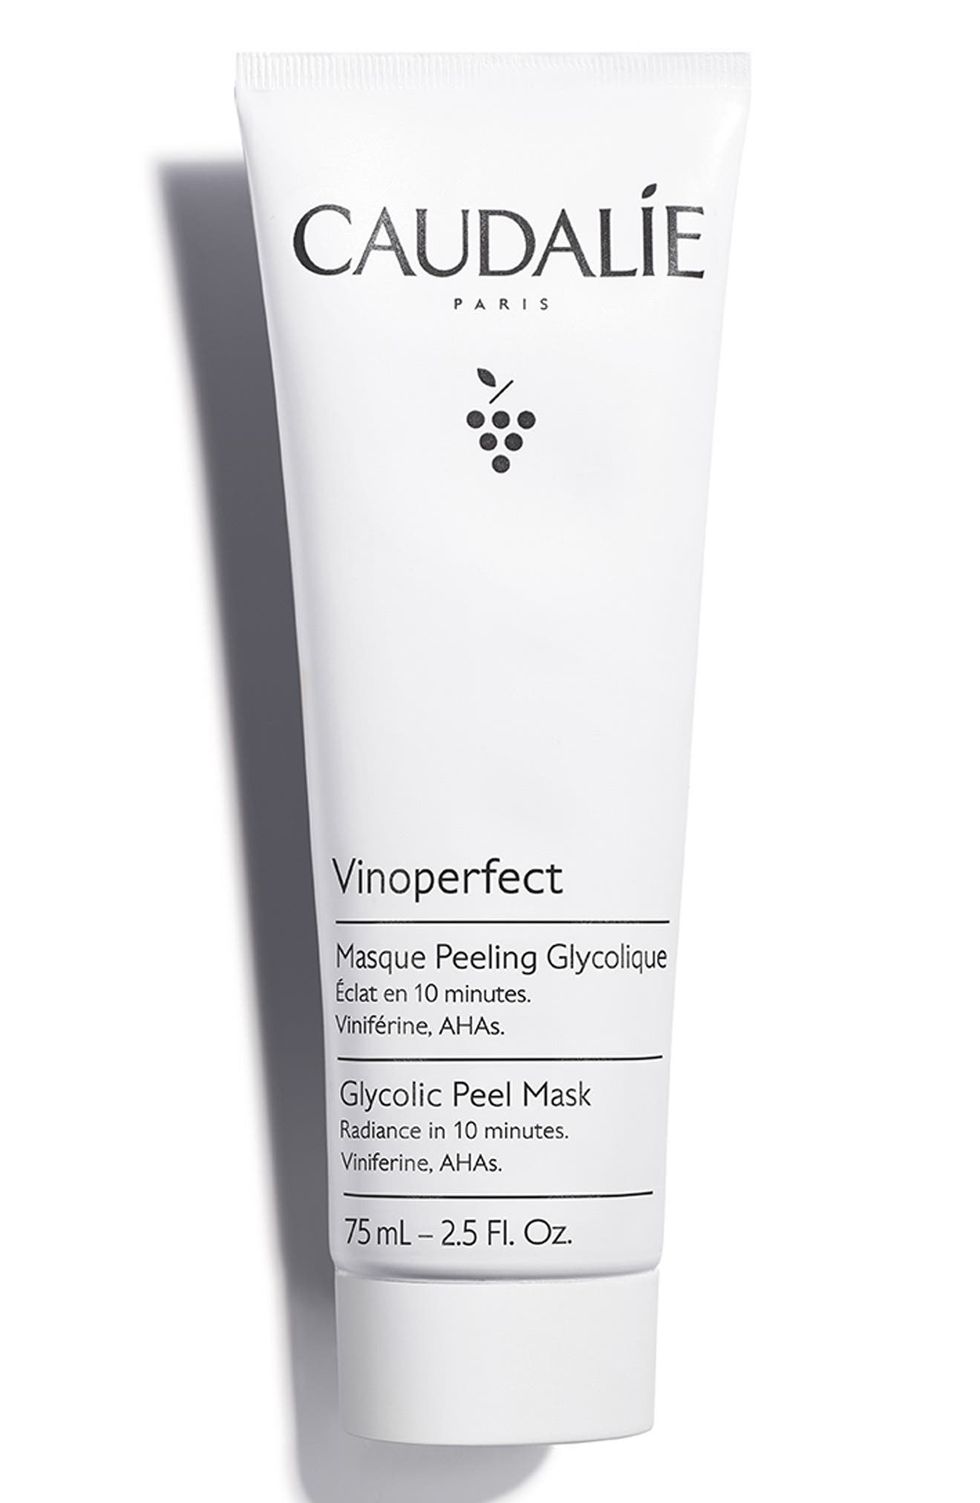 CAUDALIE Vinoperfect Glycolic Peel Face Mask, Size 2.5 Oz at Nordstrom